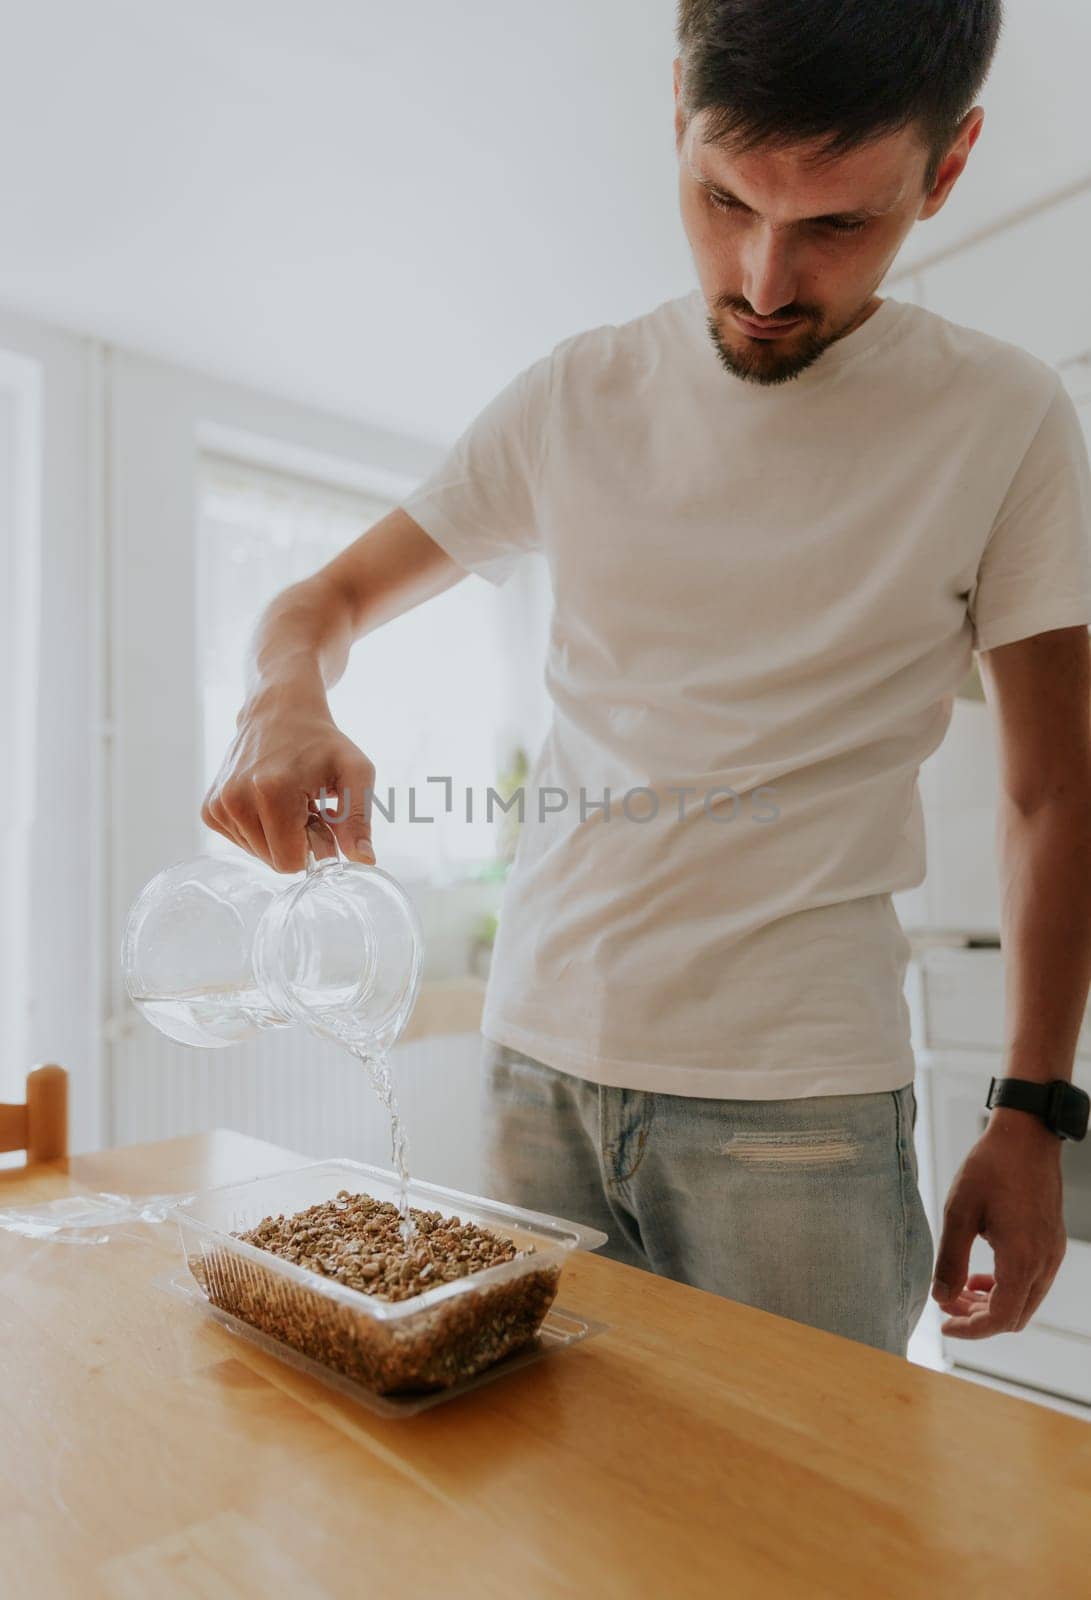 One young Caucasian recognizable man waters wheat seeds with soil into a container with one hand from a glass jug, standing in the kitchen at a wooden table, close-up side view.